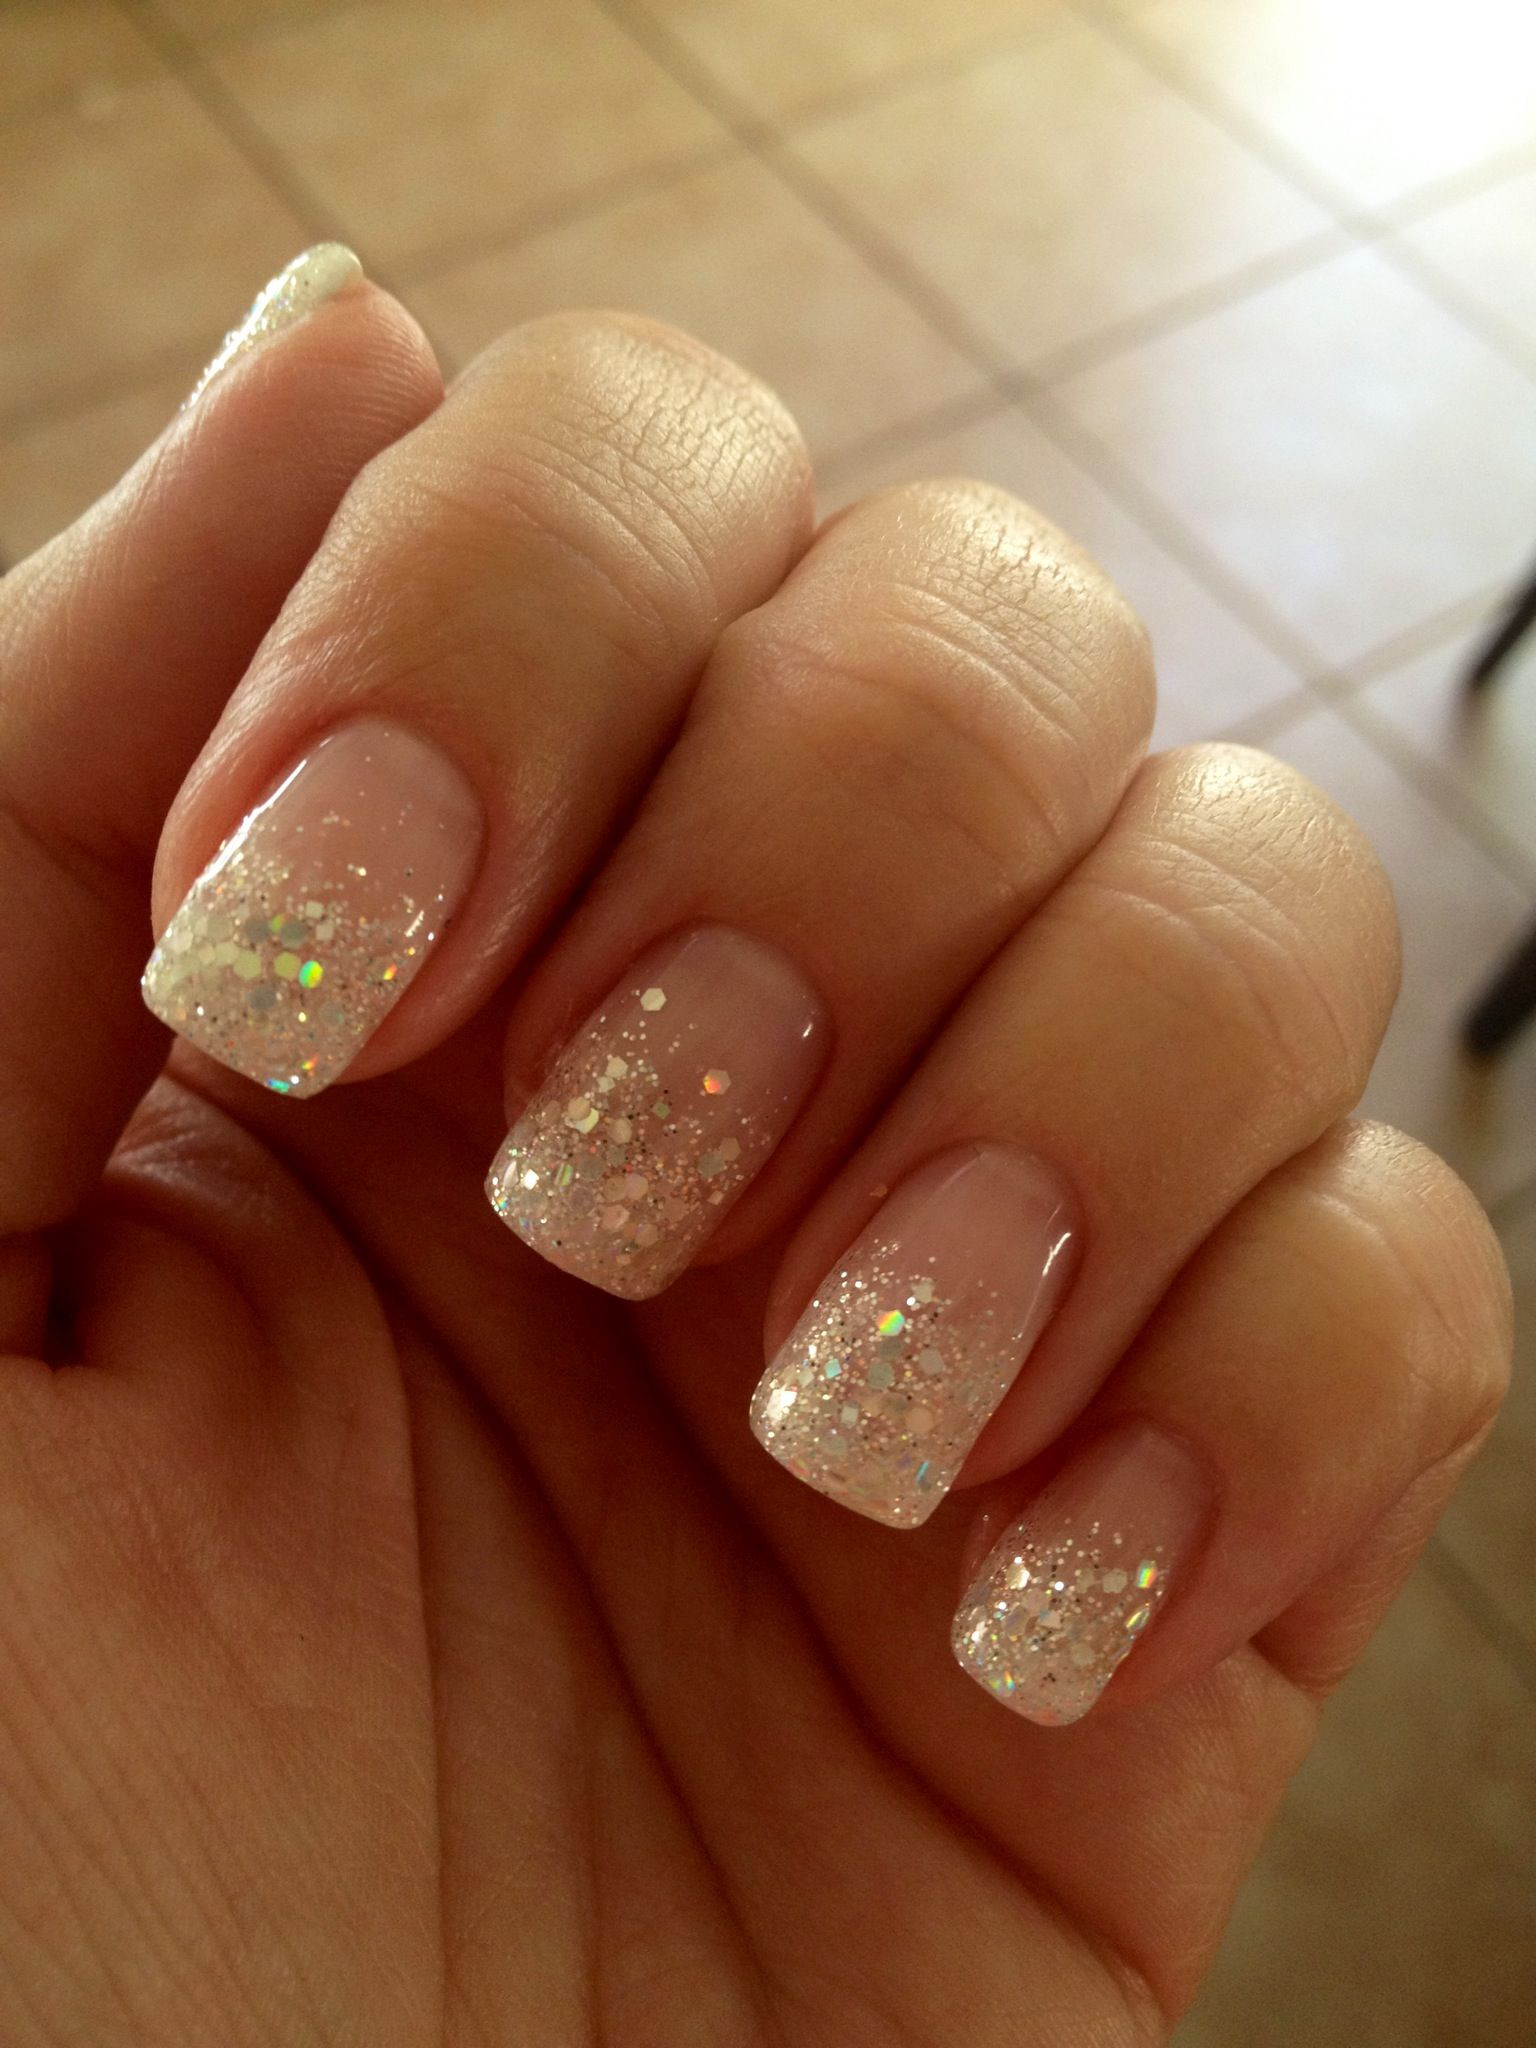 Fade Glitter Nails
 Glitter French Manicure Fade Can you say wedding nails